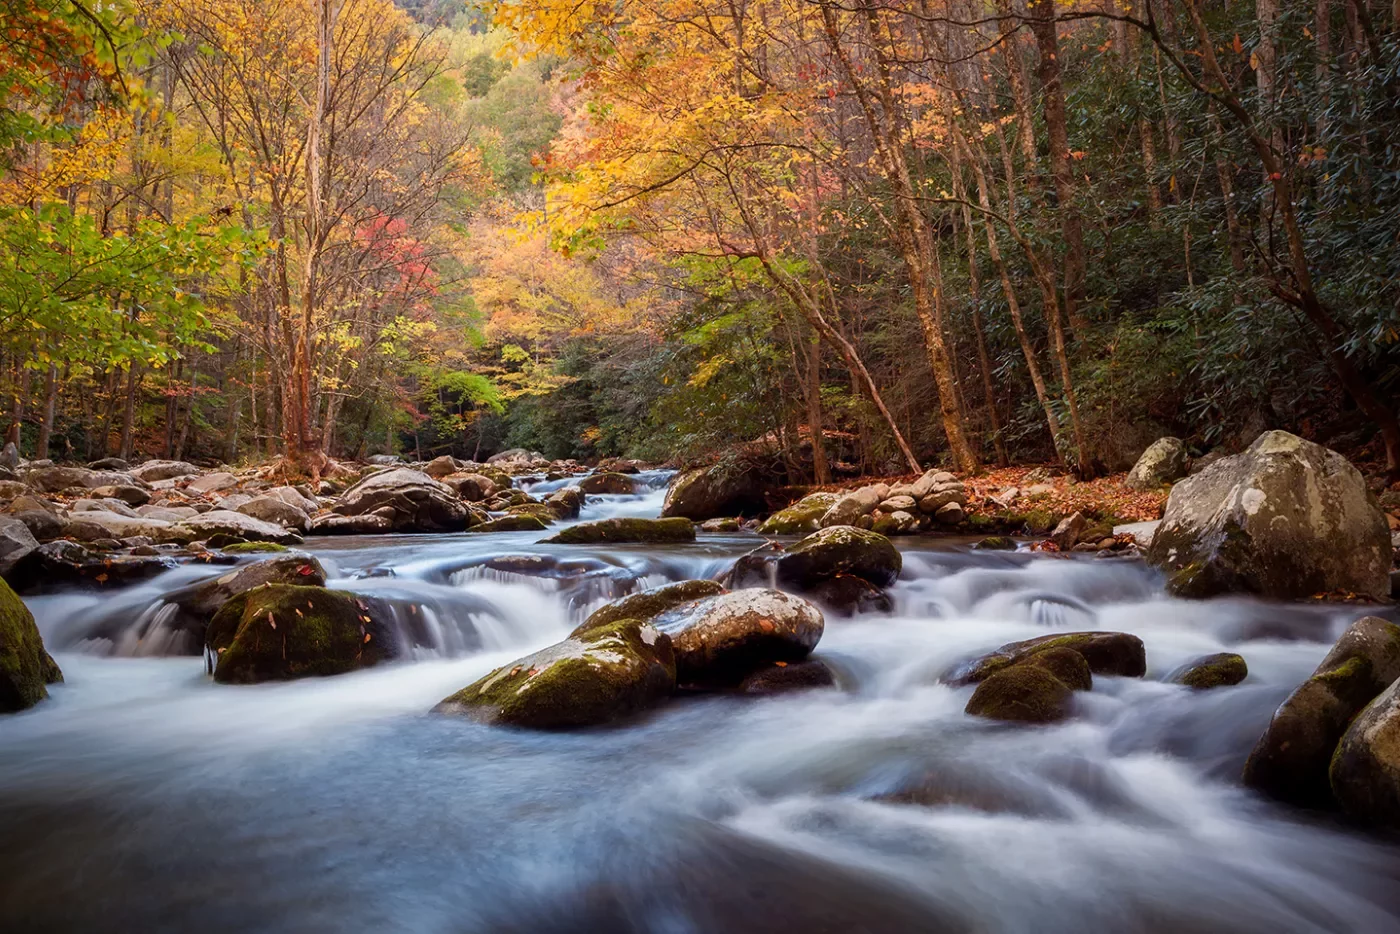 Wide shot of flowing river among autumnal forest.